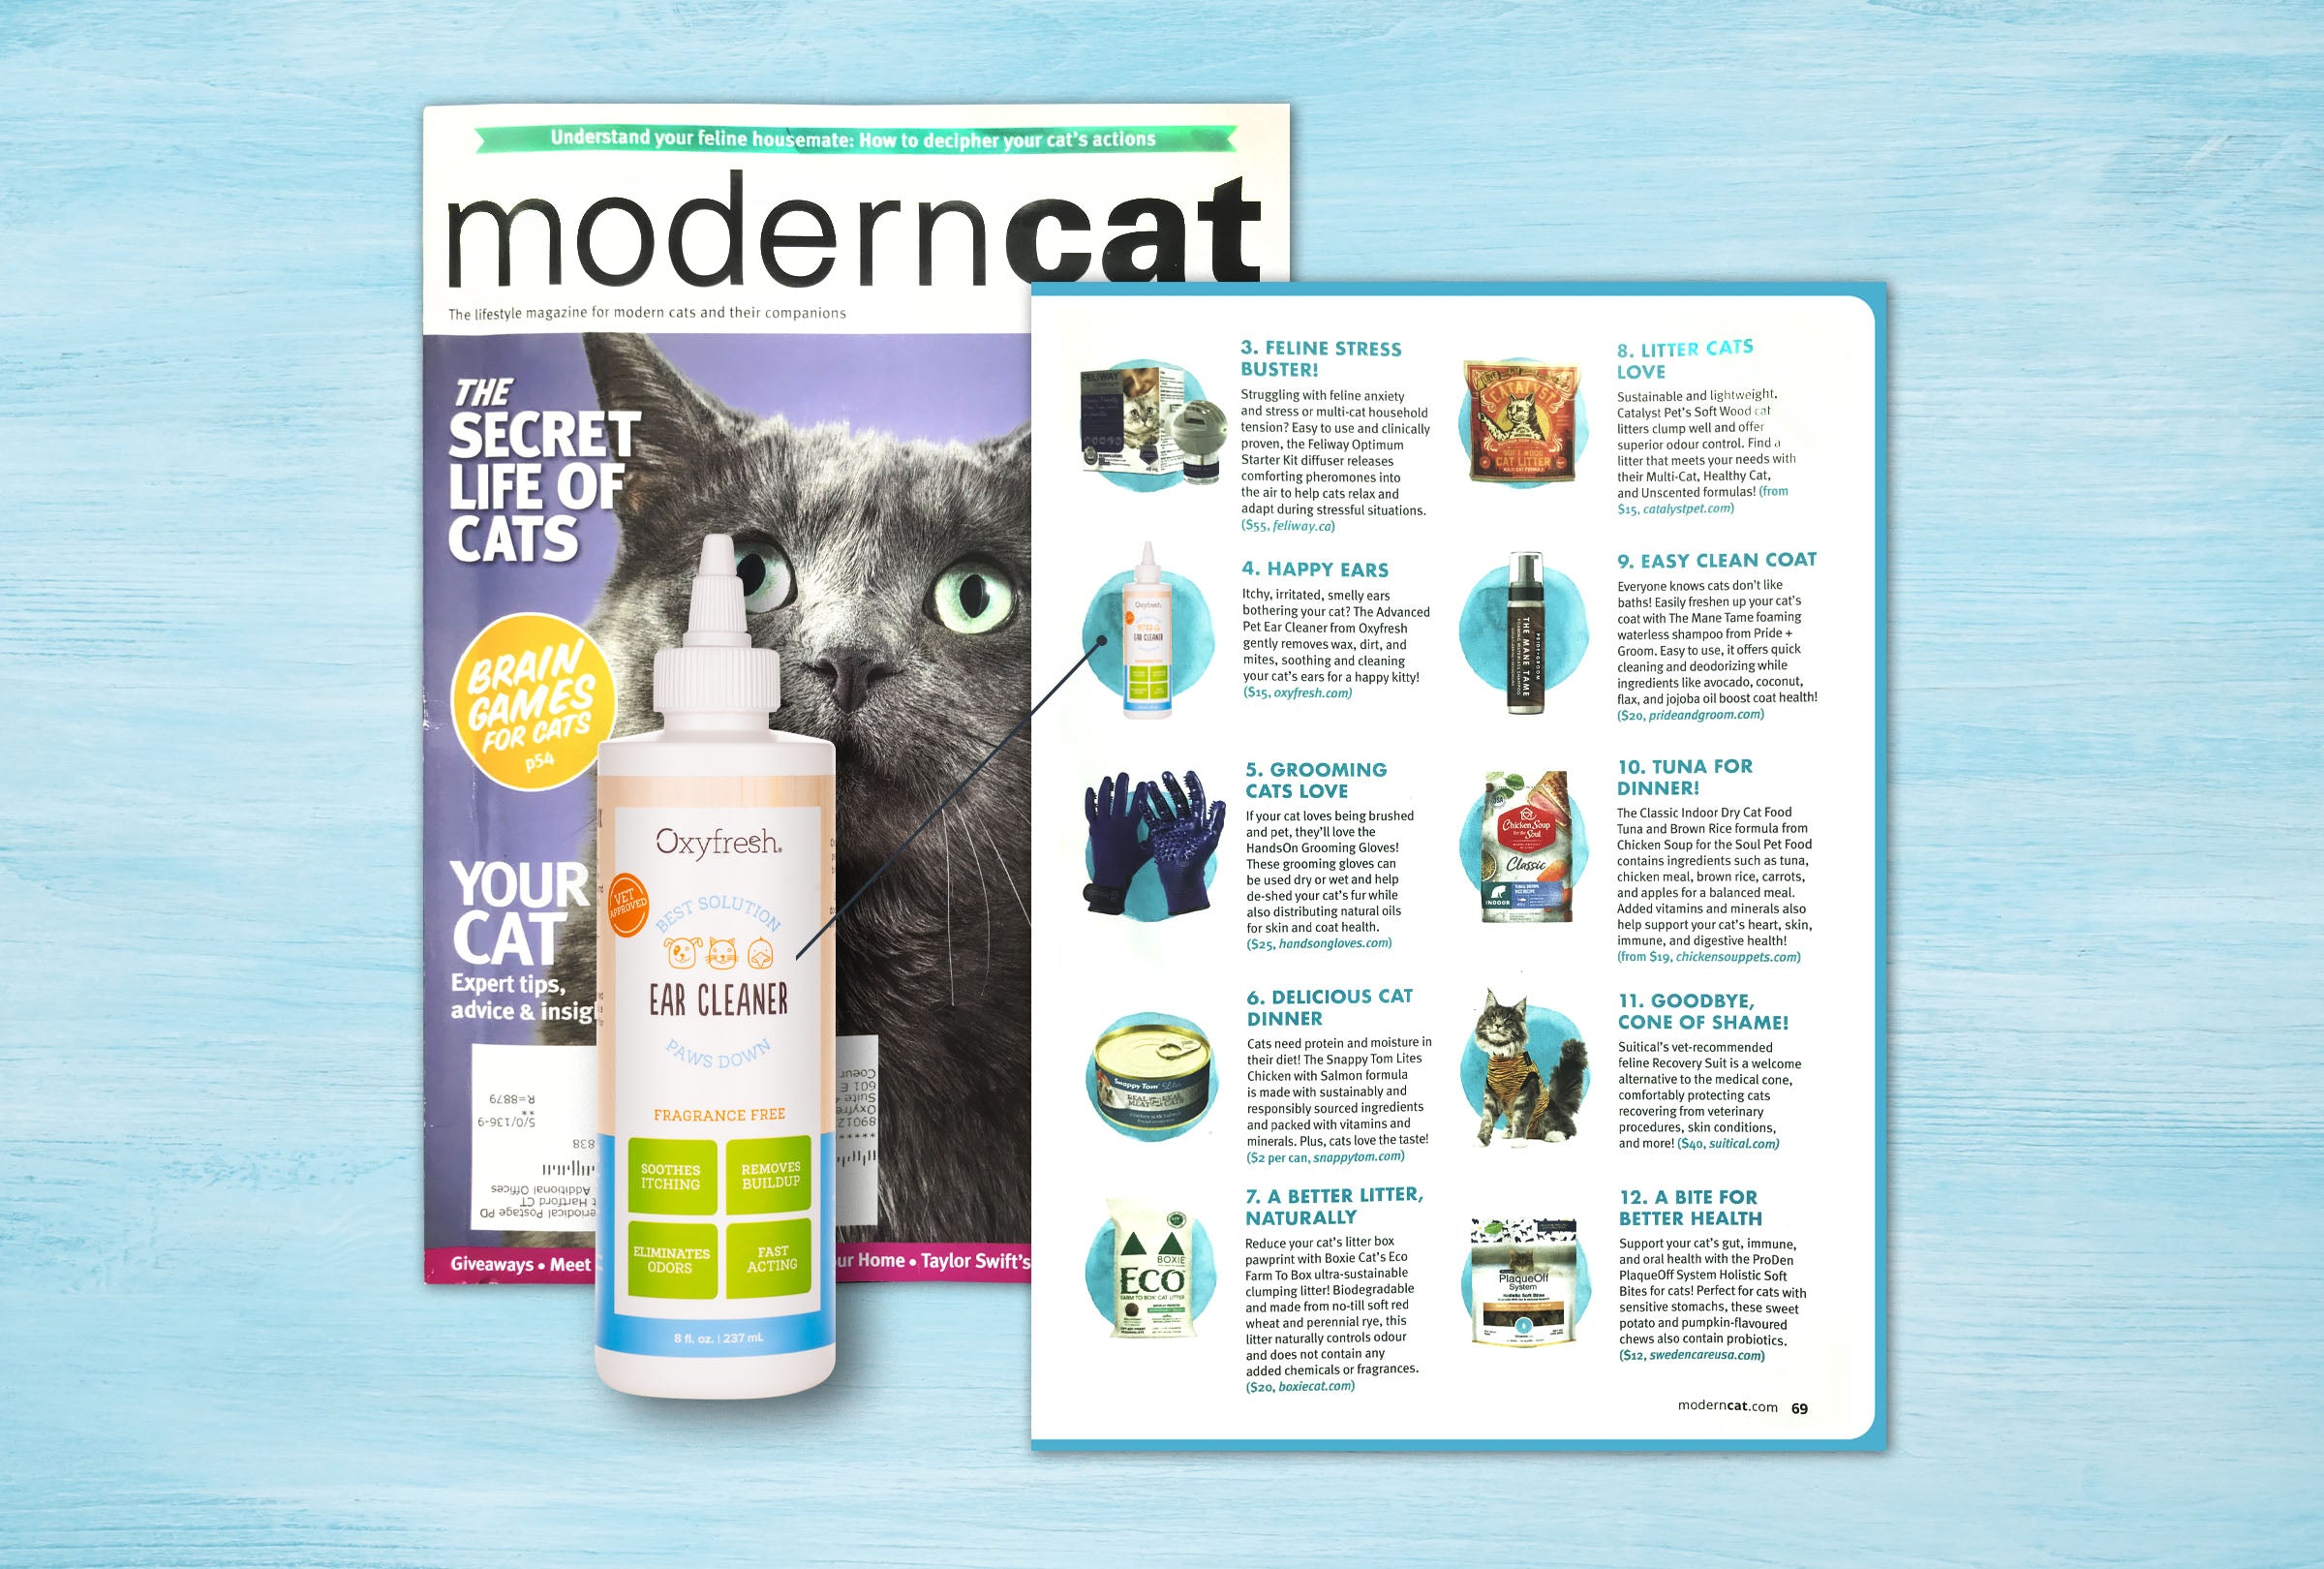 Oxyfresh Pet Ear Cleaner Featured as a "Healthy PAWS" Pick in Modern Cat Magazine